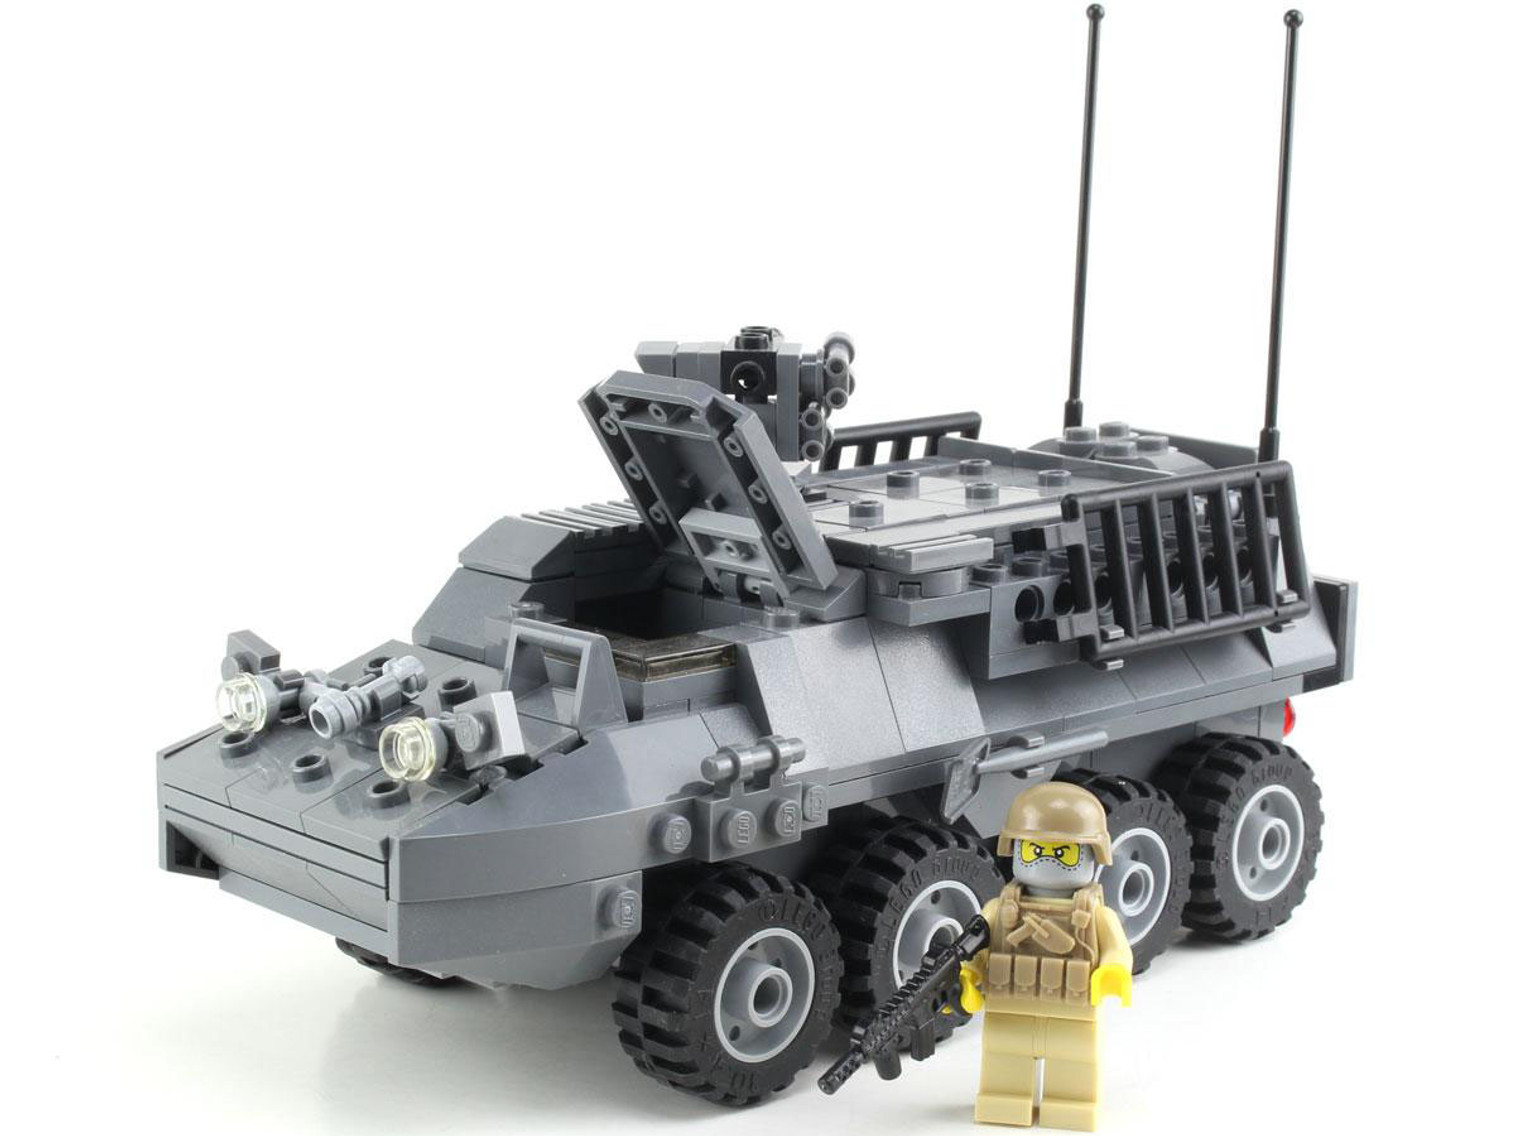 Battle Brick Customs Vehicle Set (Model: Army Stryker Armored Personnel Carrier)